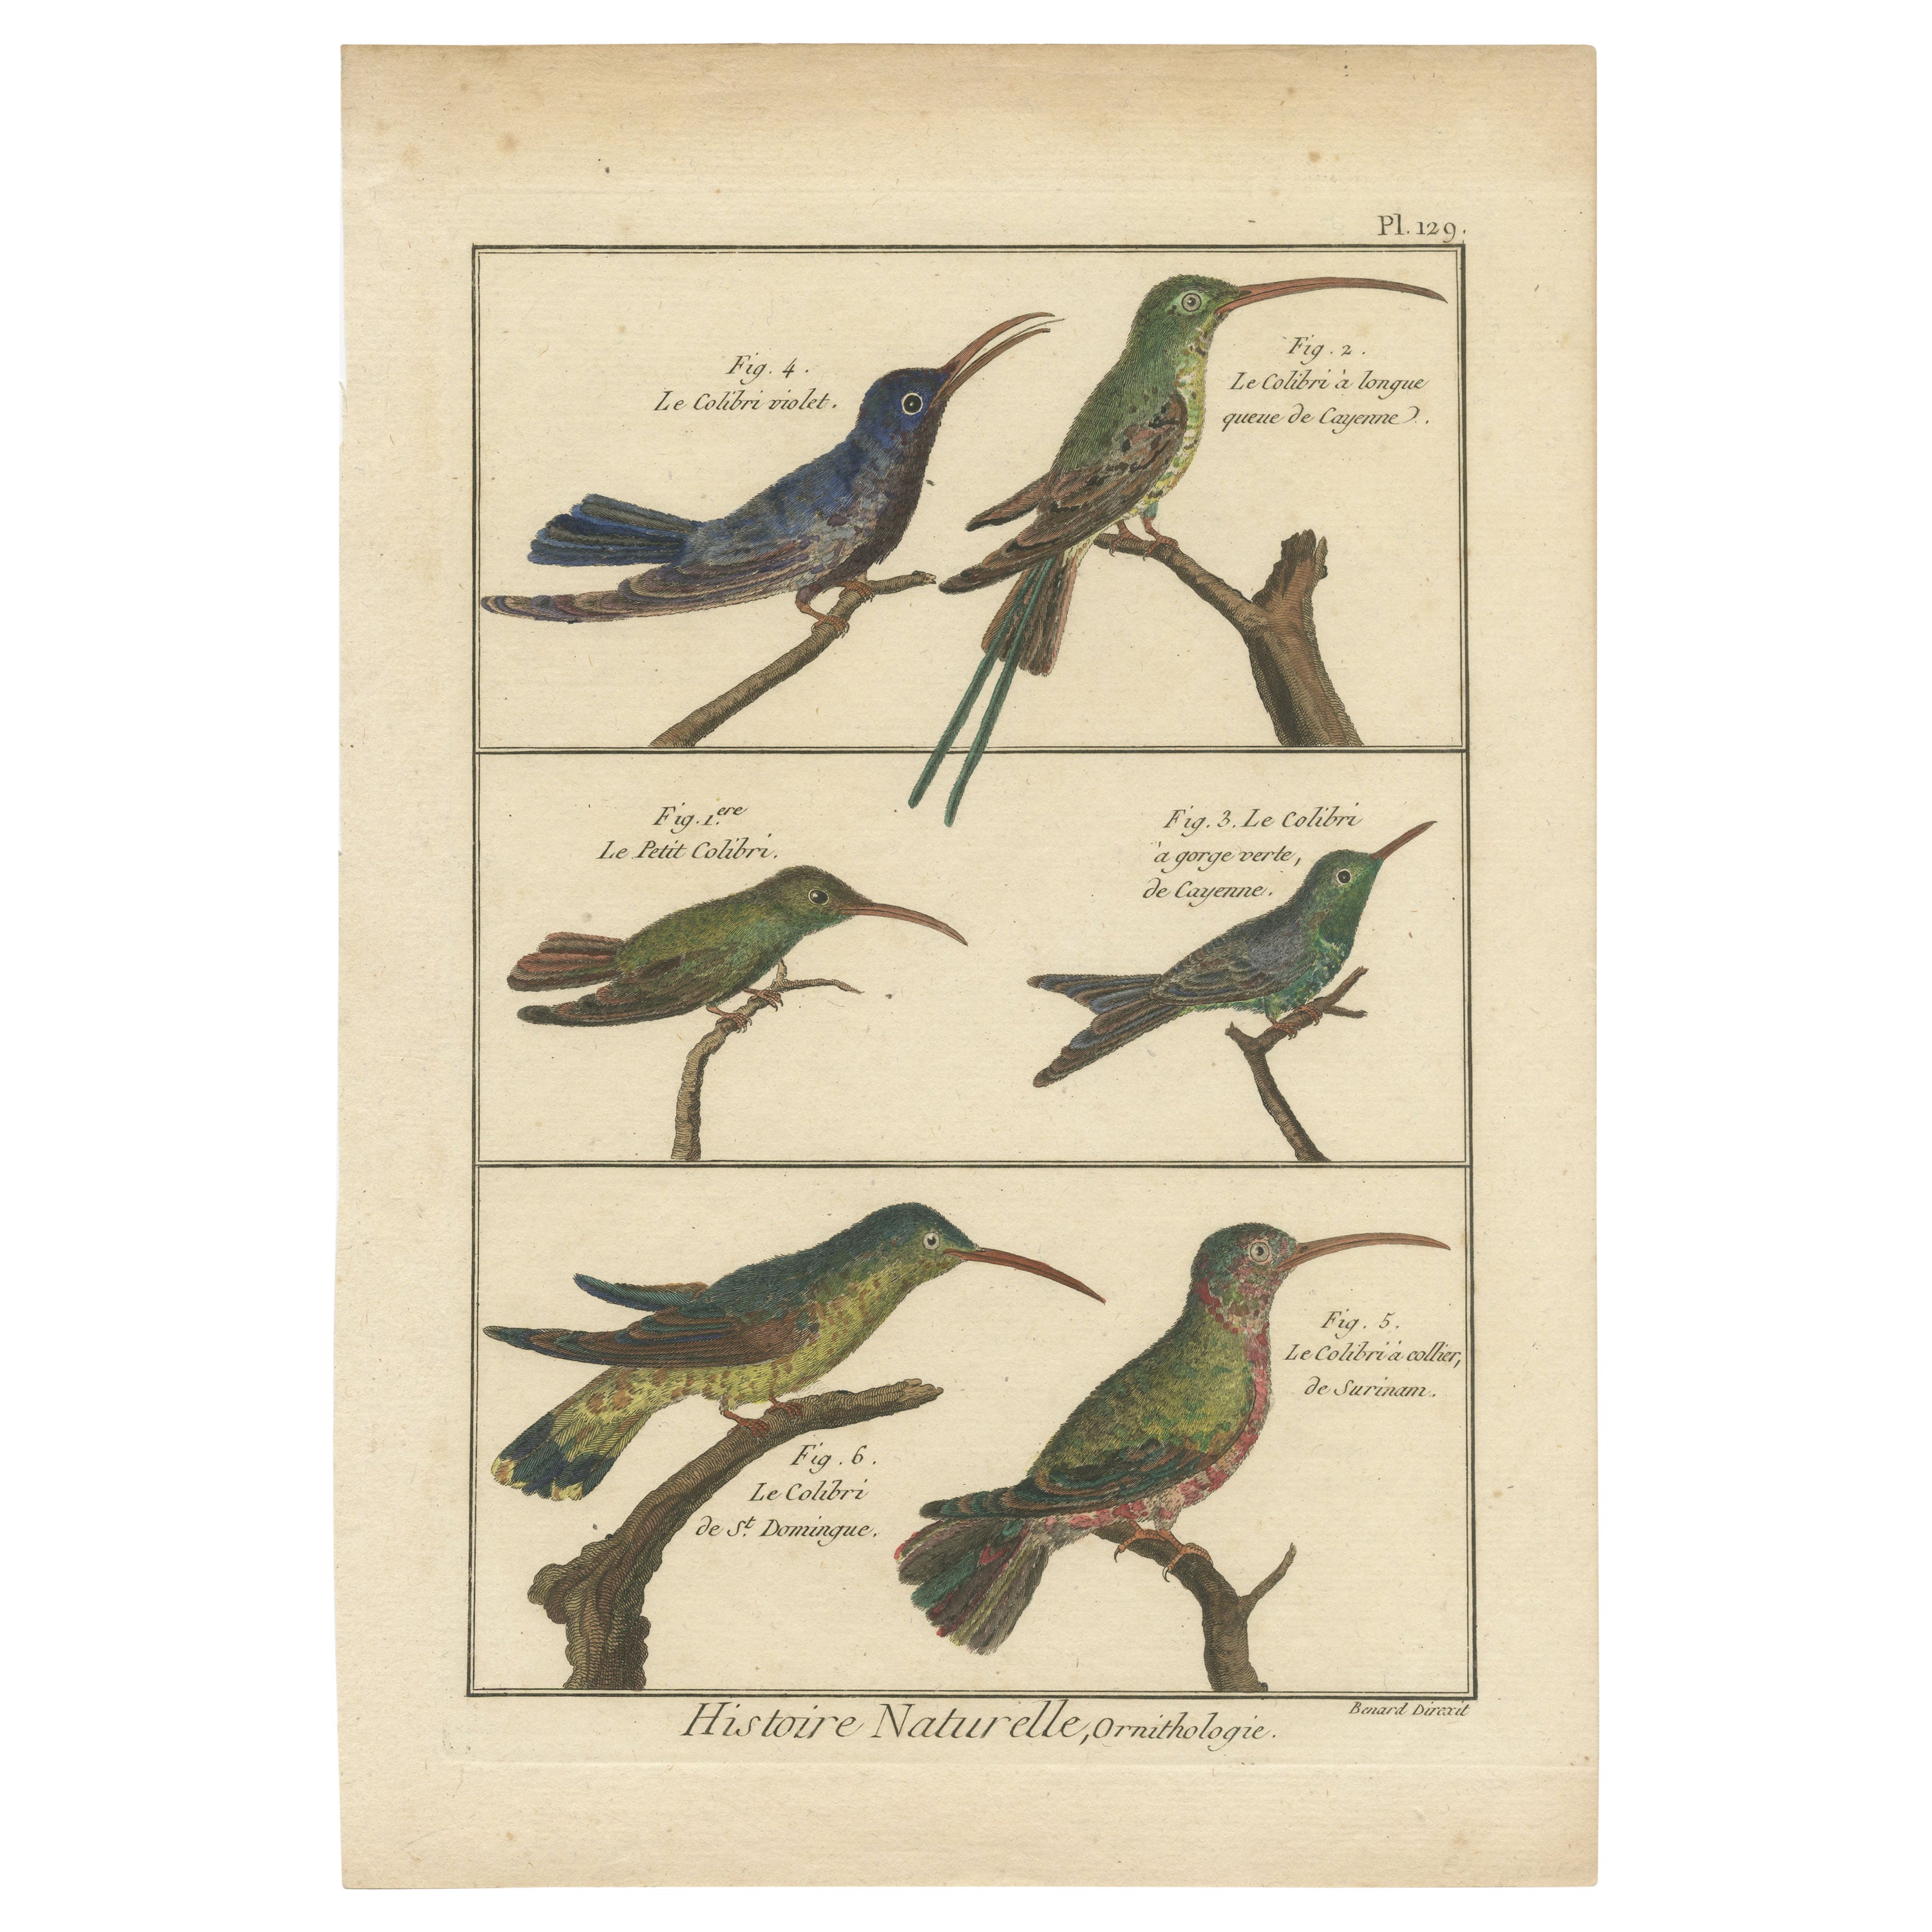 Very Detailled, Richly Hand-Colored, Rare Copper Engraving of 6 Colibris (1792).